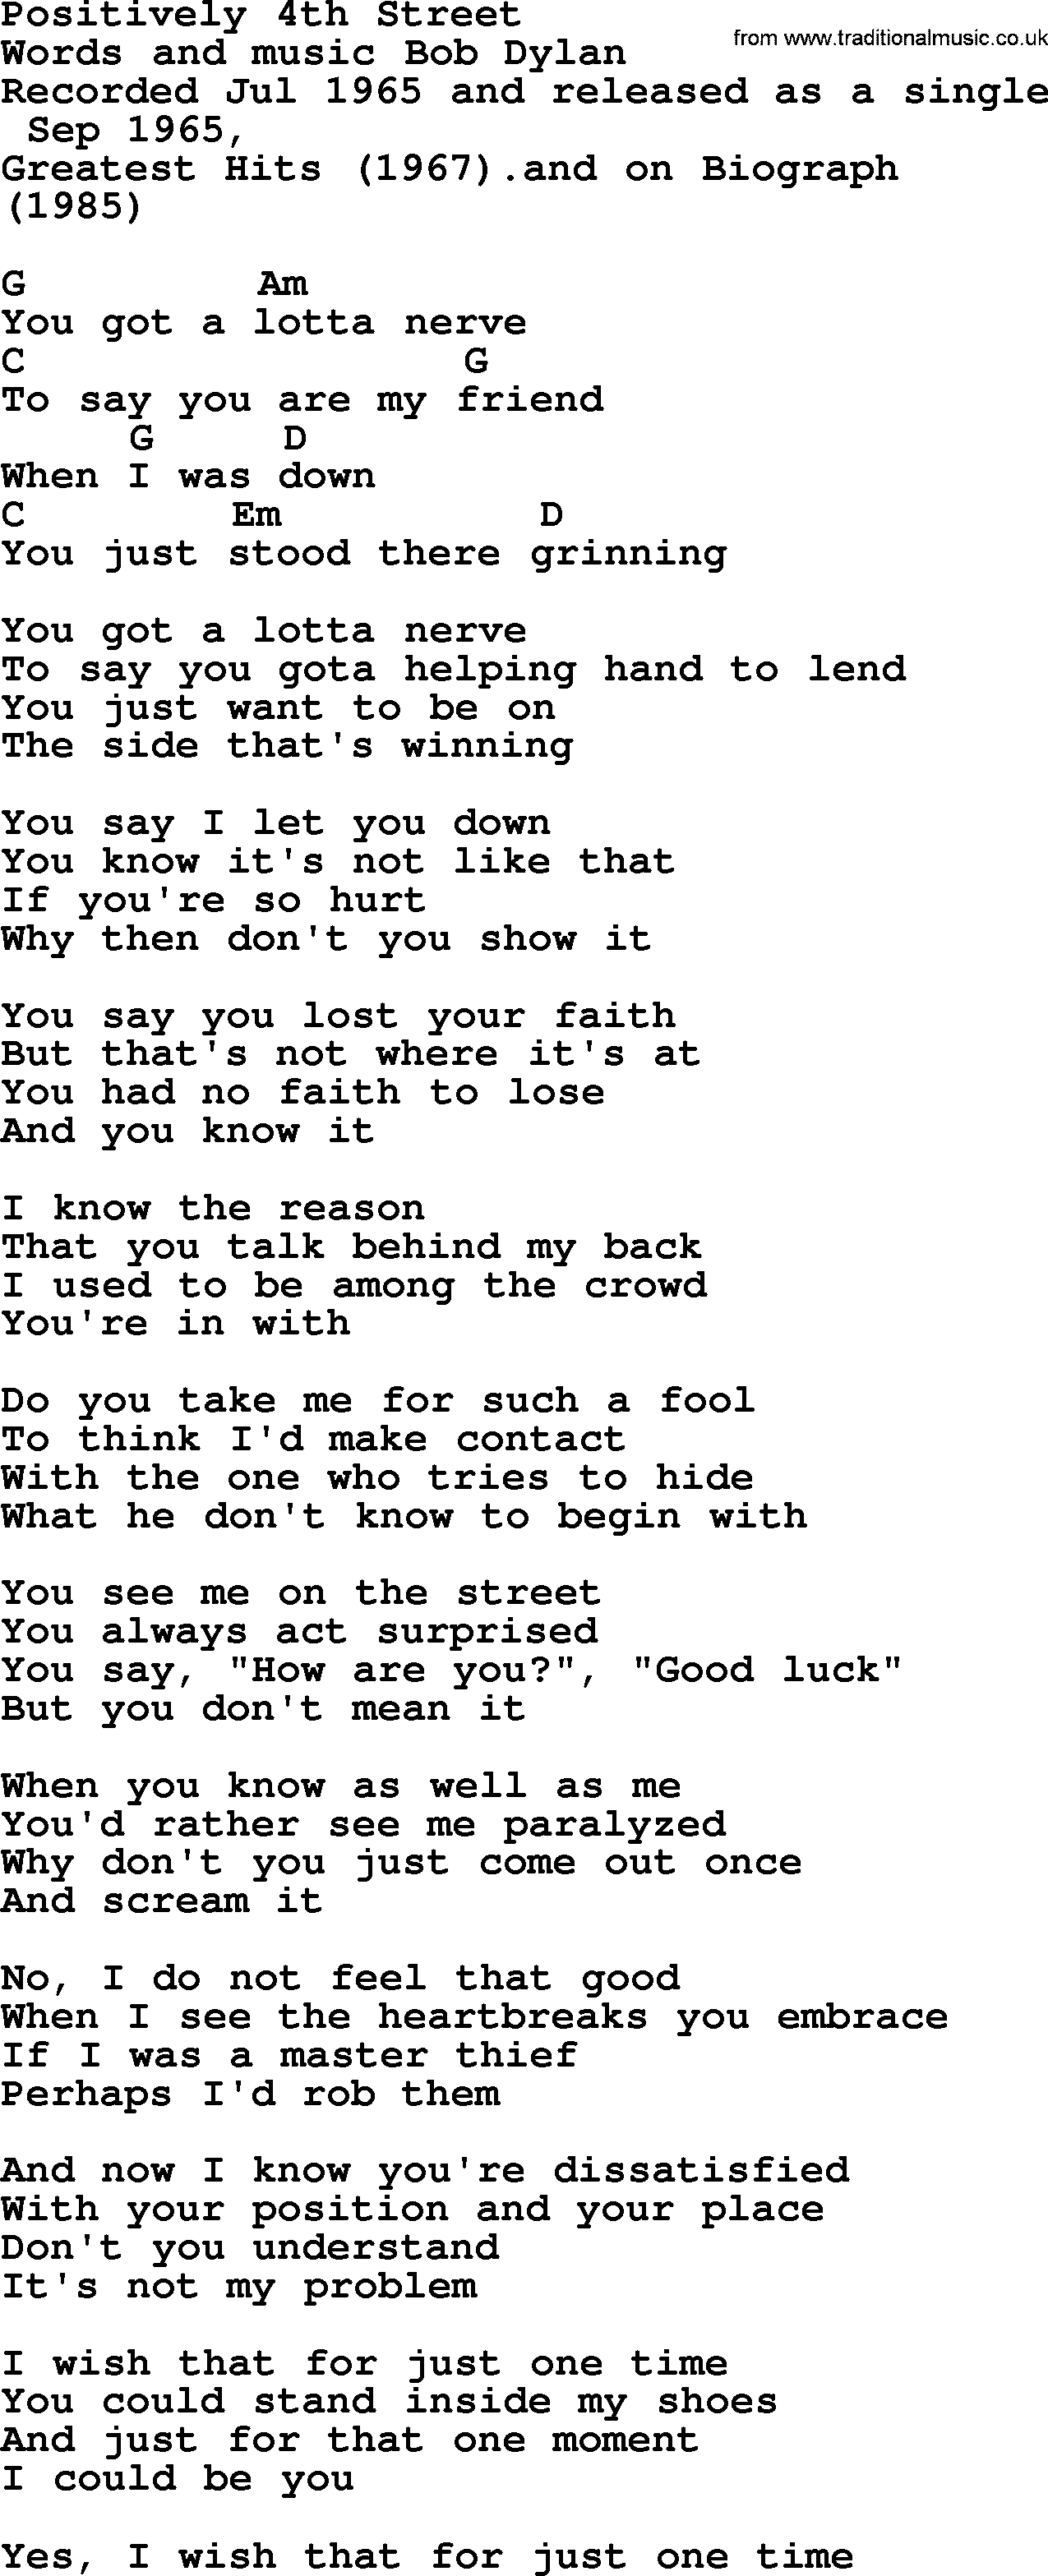 Bob Dylan song, lyrics with chords - Positively 4th Street